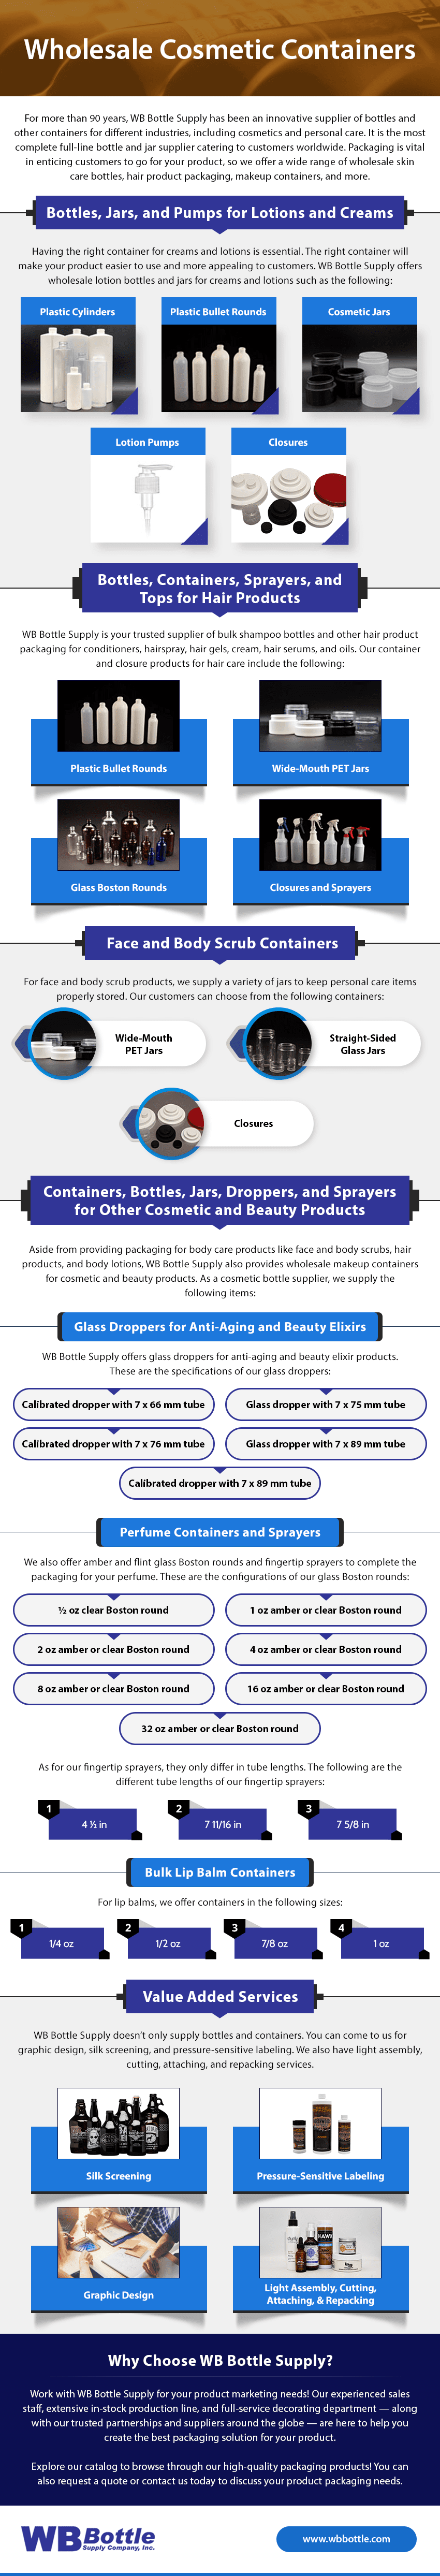 Wholesale-Cosmetic-Containers